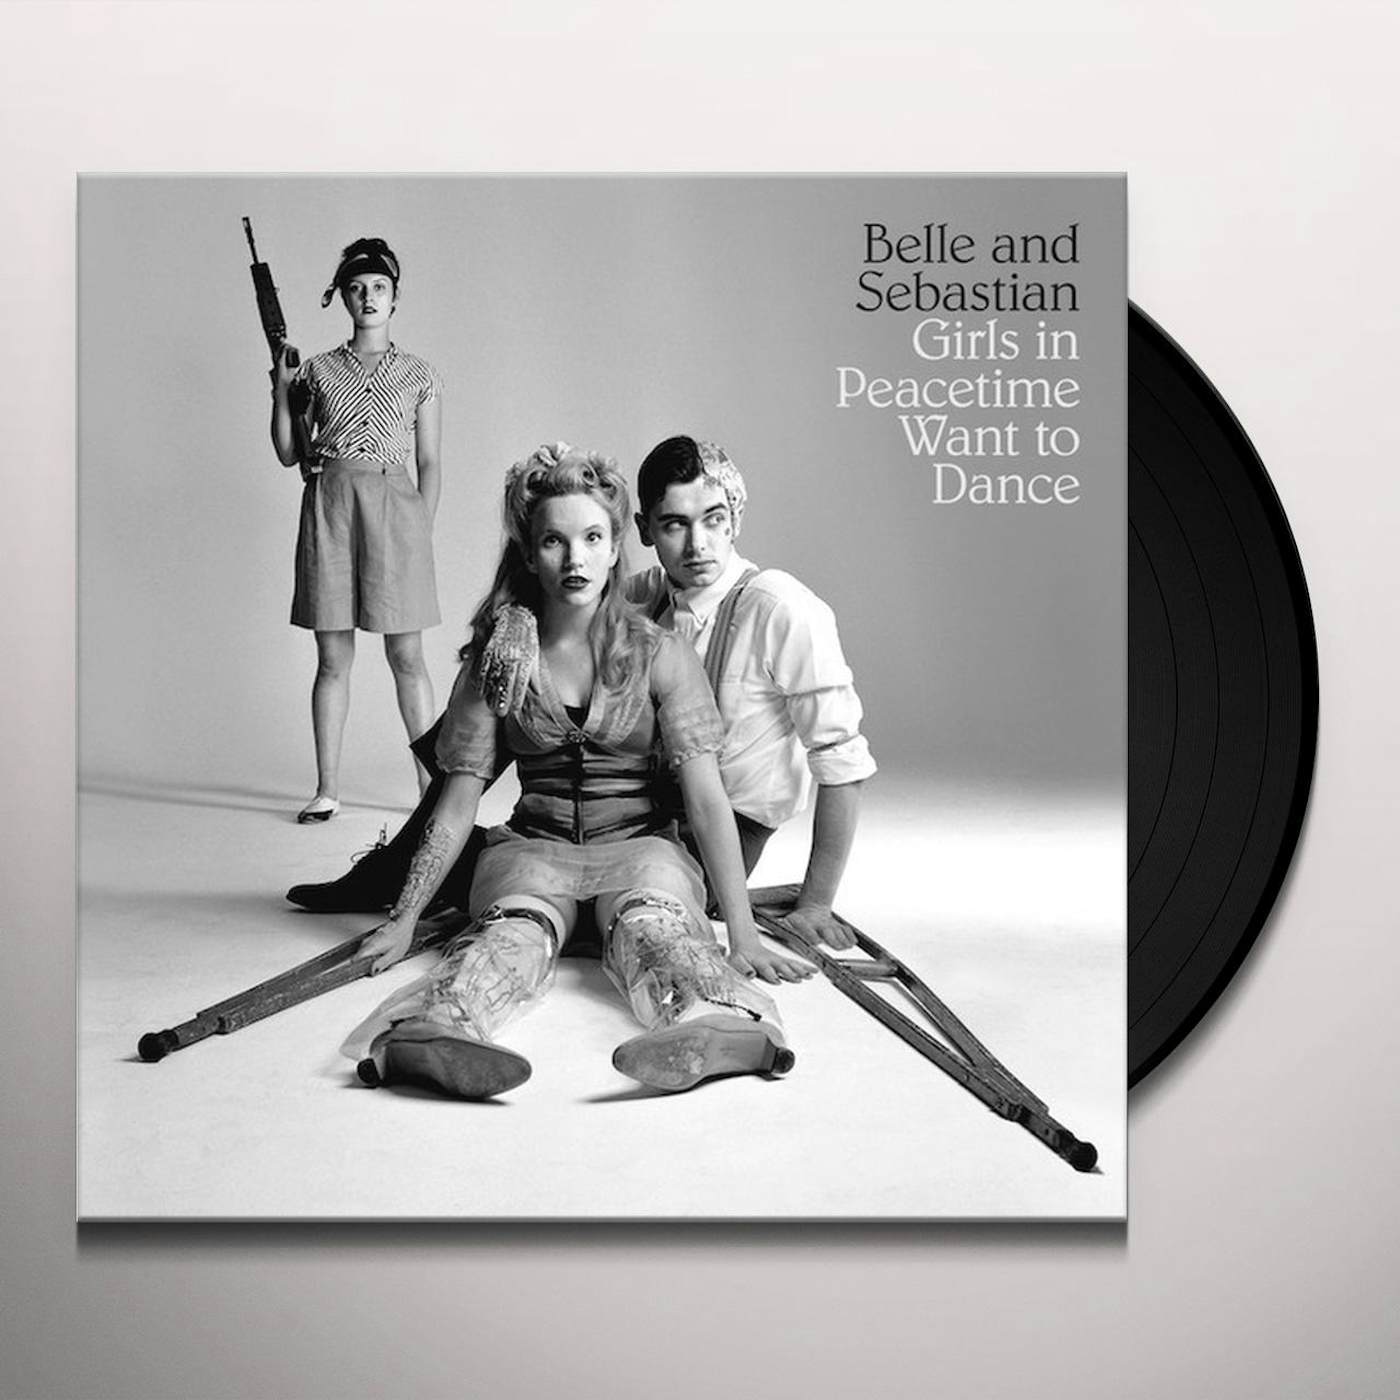 Belle and Sebastian Girls in Peacetime Want to Dance Vinyl Record